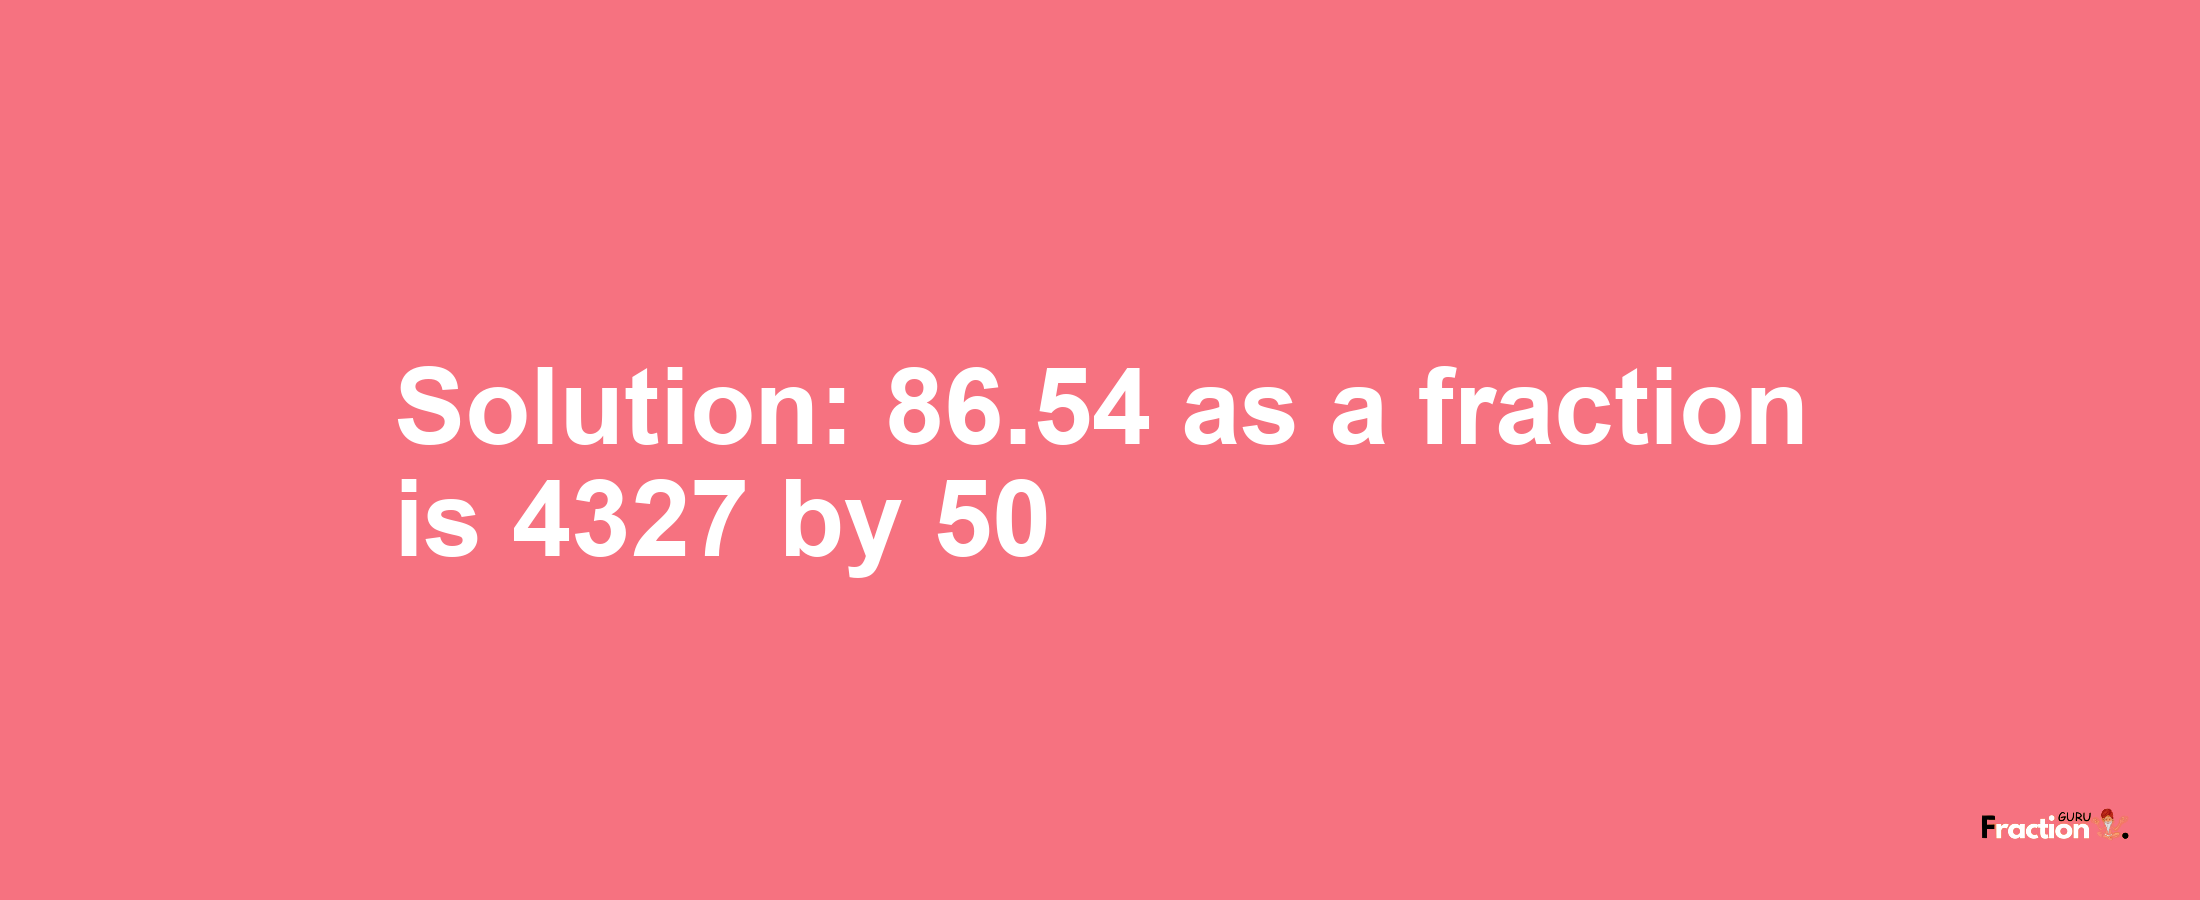 Solution:86.54 as a fraction is 4327/50